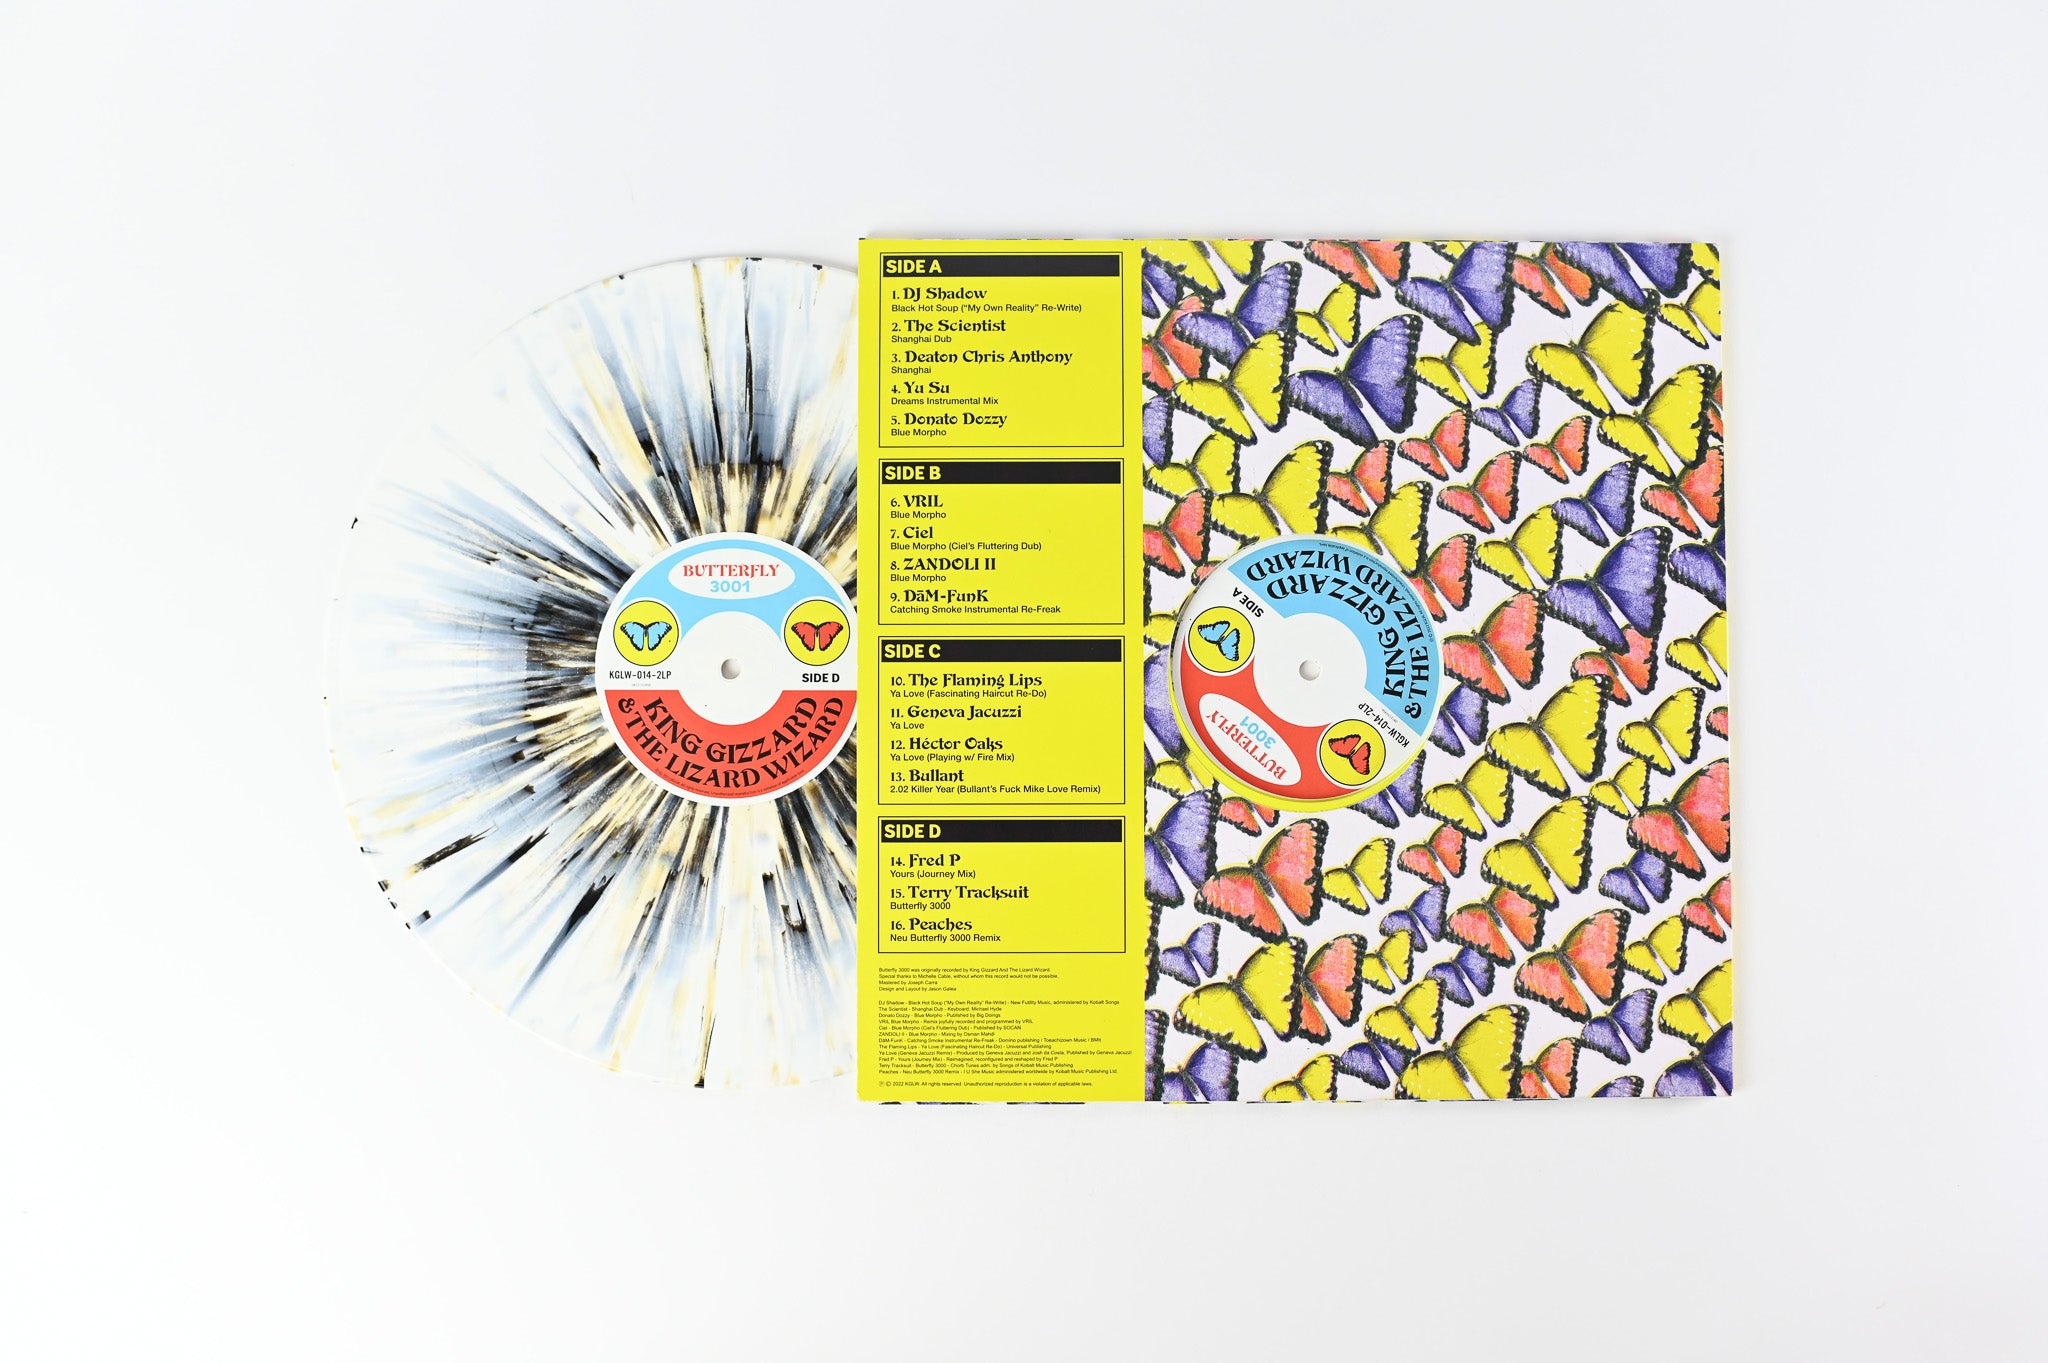 King Gizzard And The Lizard Wizard - Butterfly 3001 Ltd White with Black and Yellow Calypso Splatter